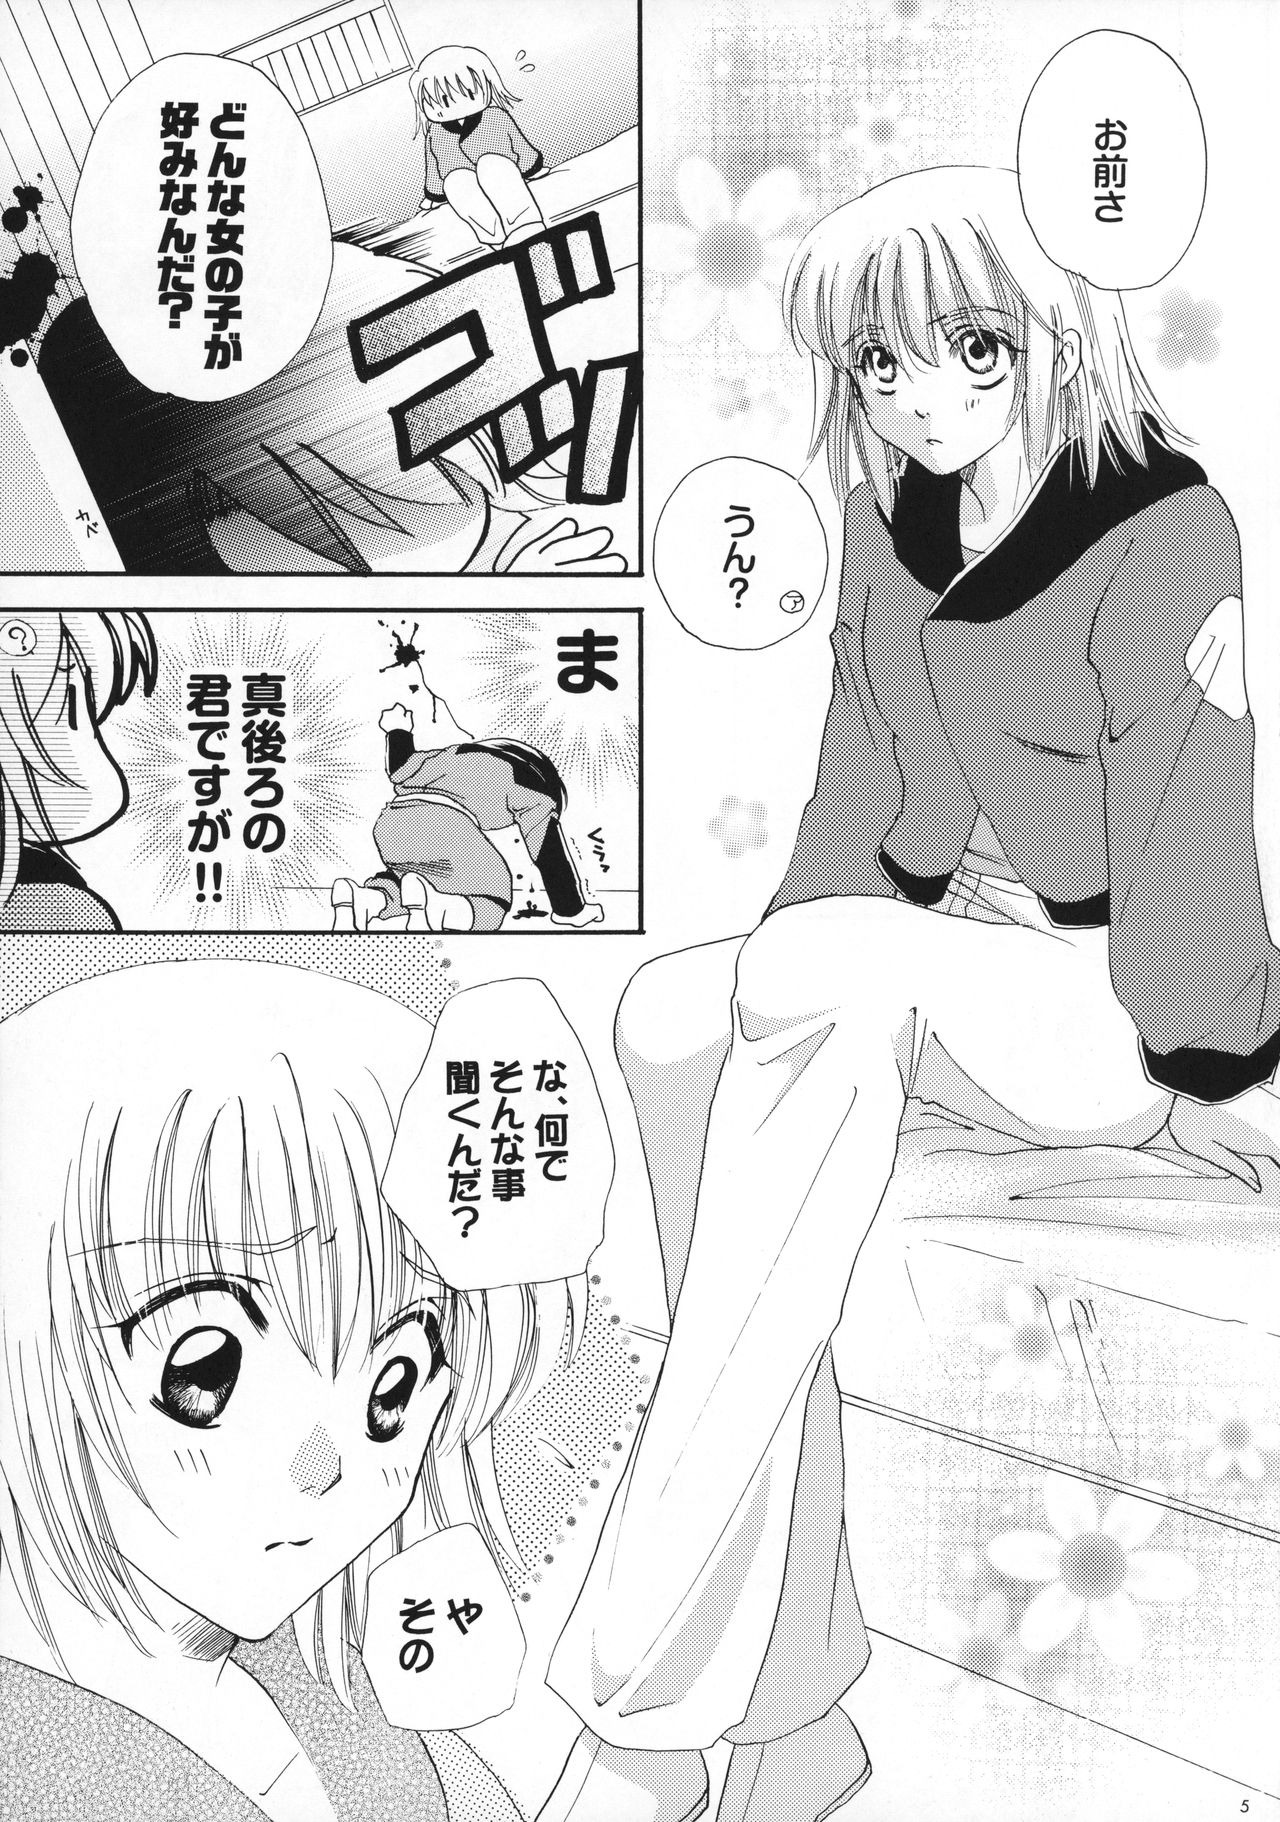 (C70) [Purincho. (Purin)] Luce (Mobile Suit Gundam SEED, Mobile Suit Gundam SEED DESTINY) page 6 full